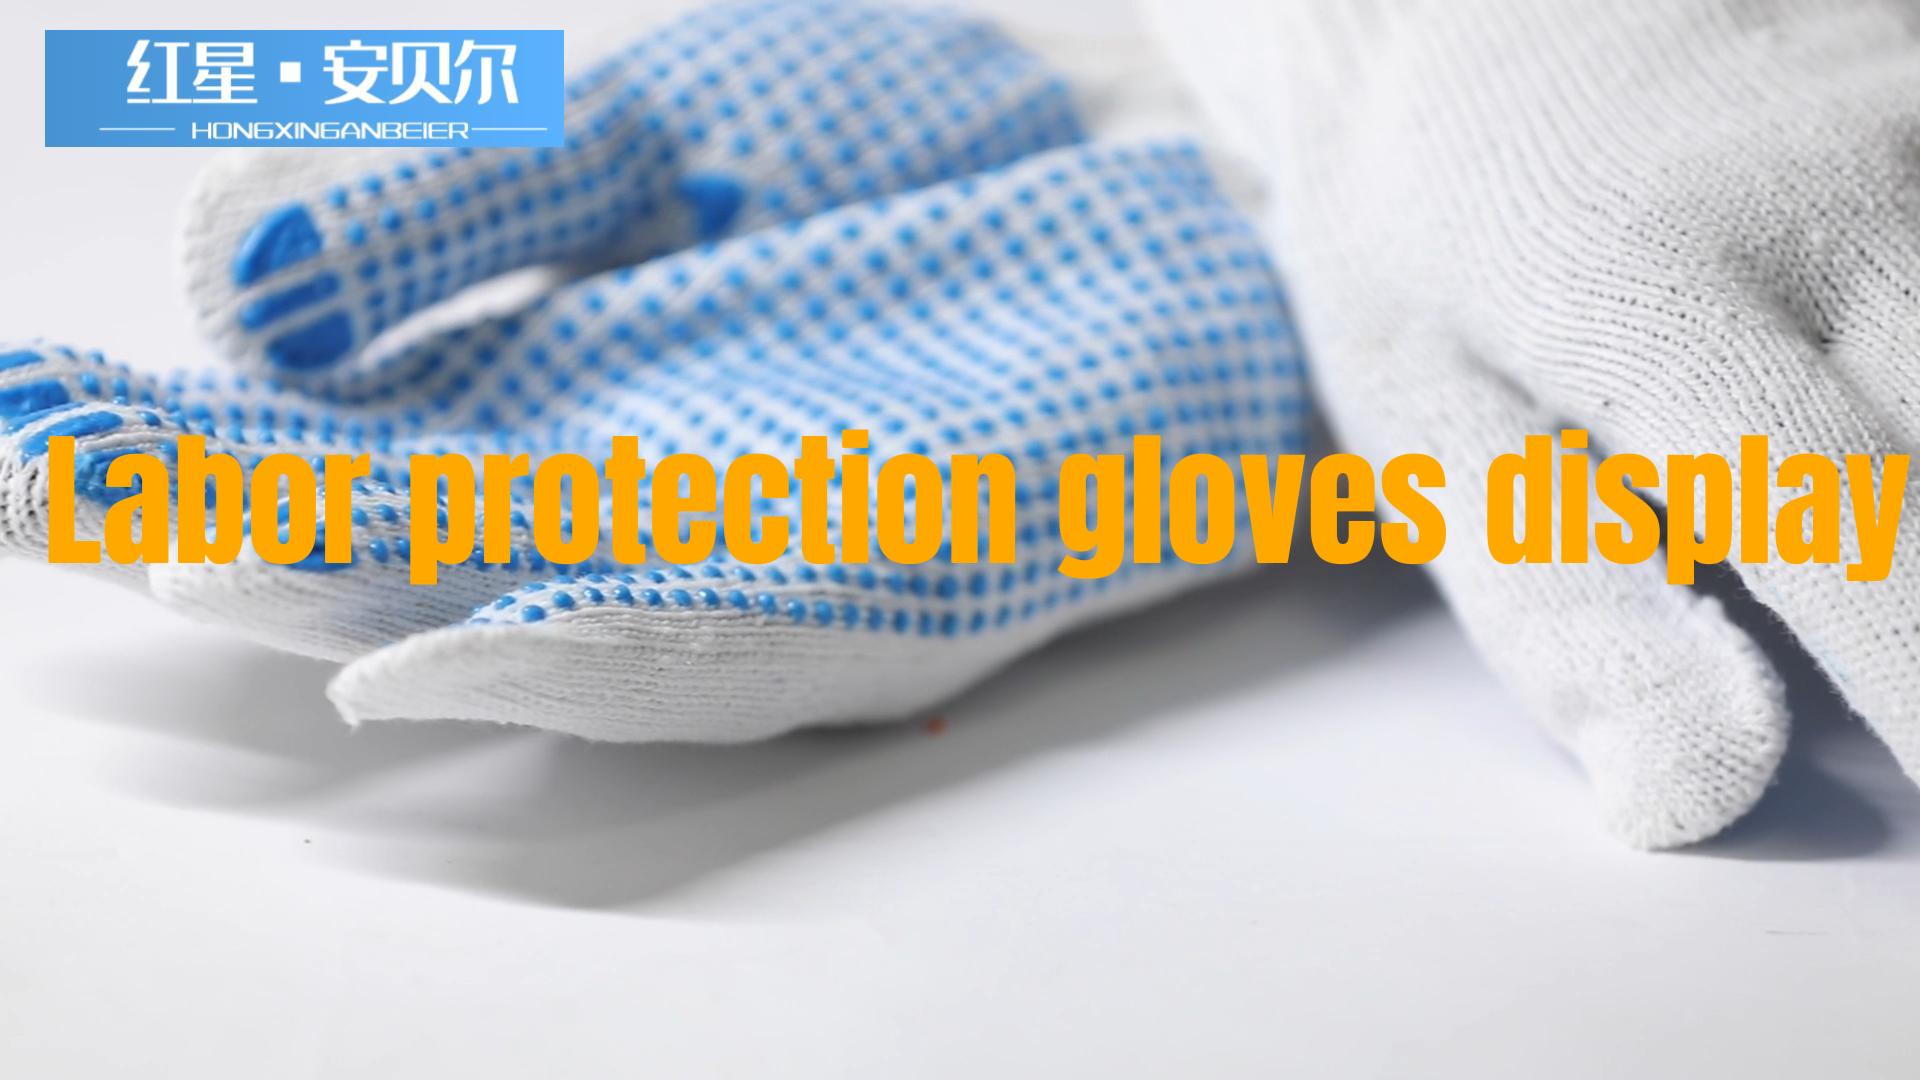 Labor protection gloves display